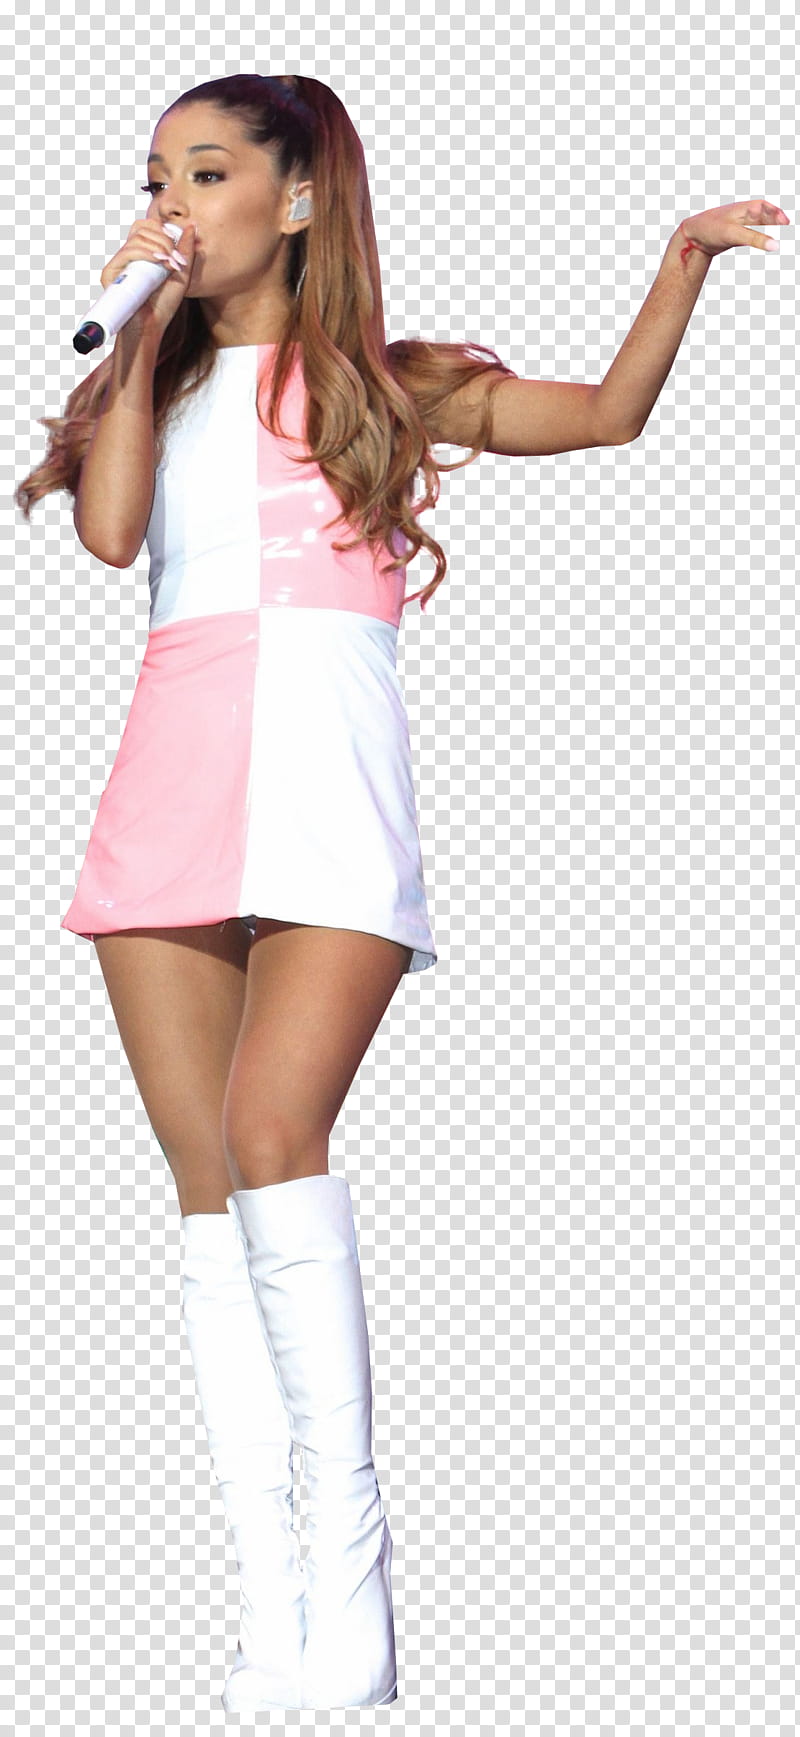 Ariana Grande, Ariana Grande in white and pink sleeveless dress holding a microphone transparent background PNG clipart